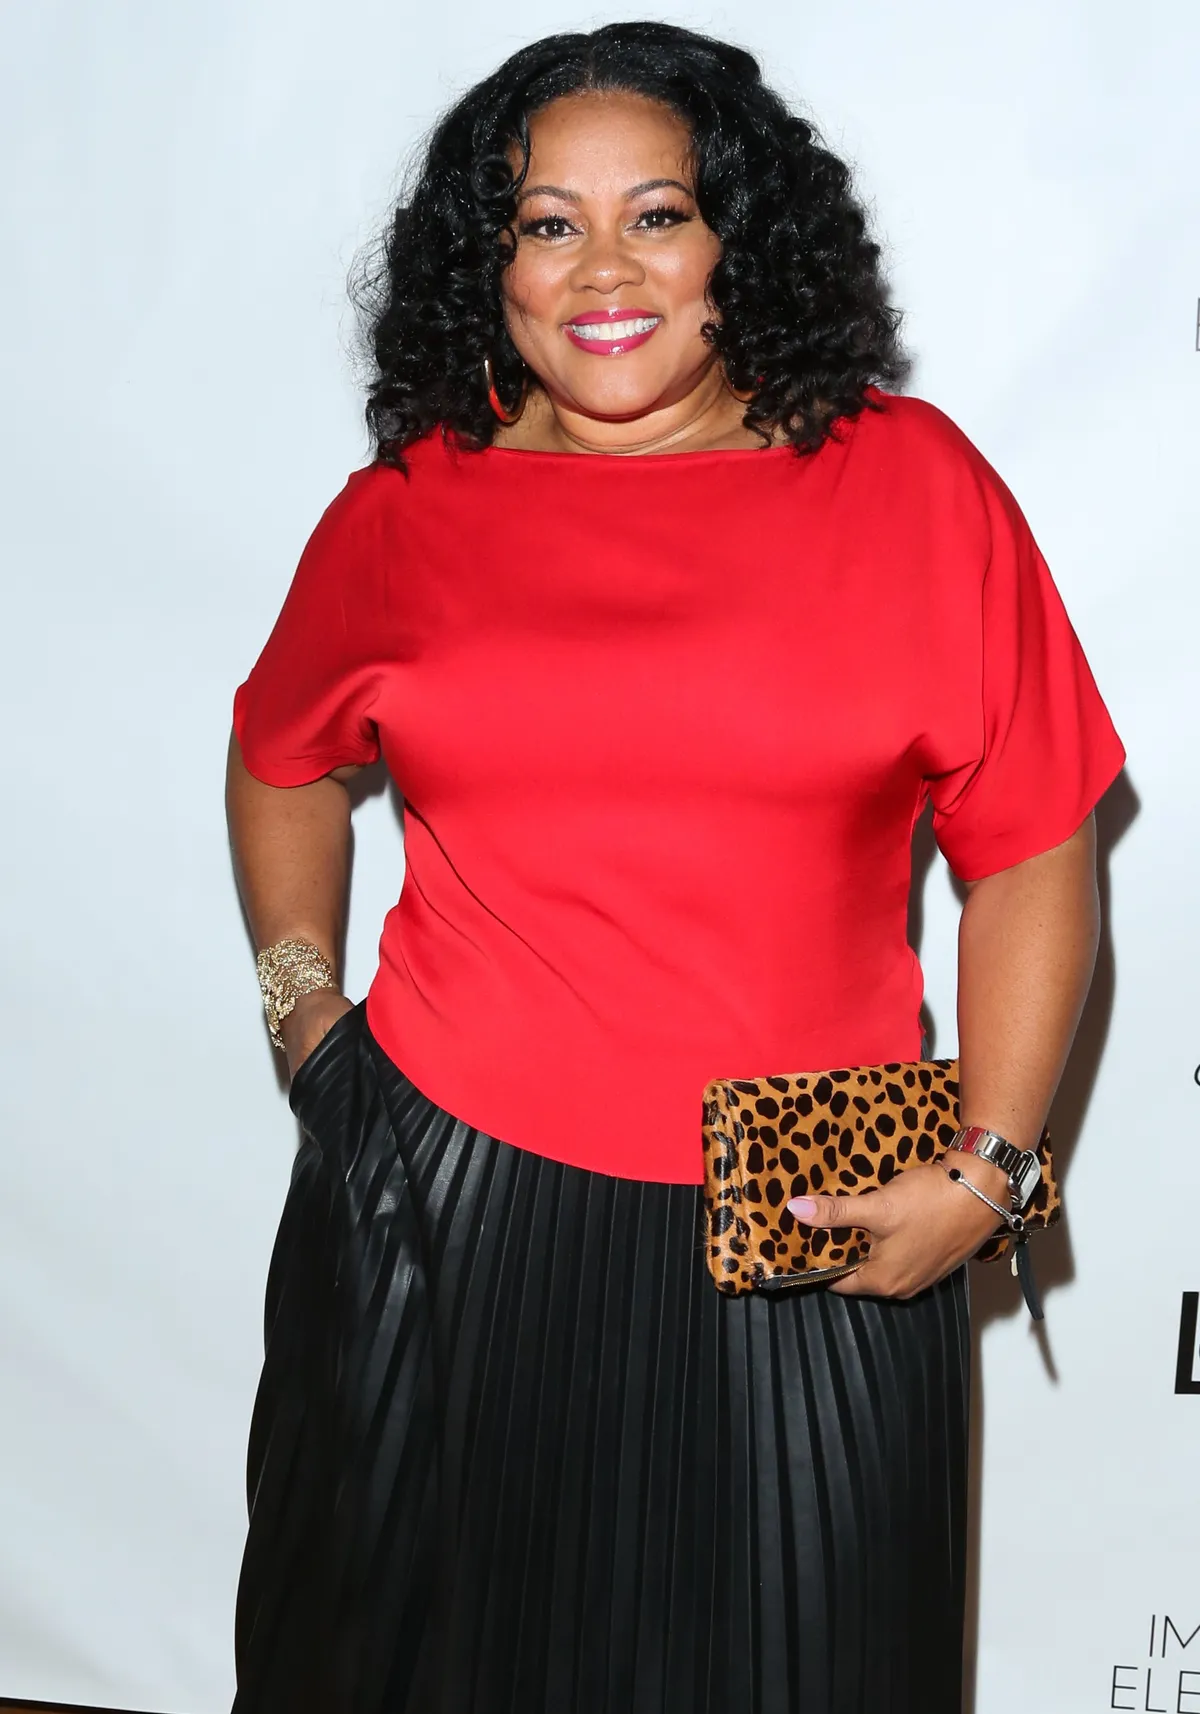 Lela Rochon attends the release party for the book "Every Day I'm Hustling" at Rain Bar and Lounge on April 8, 2018 in Studio City, California. | Photo: Getty Images